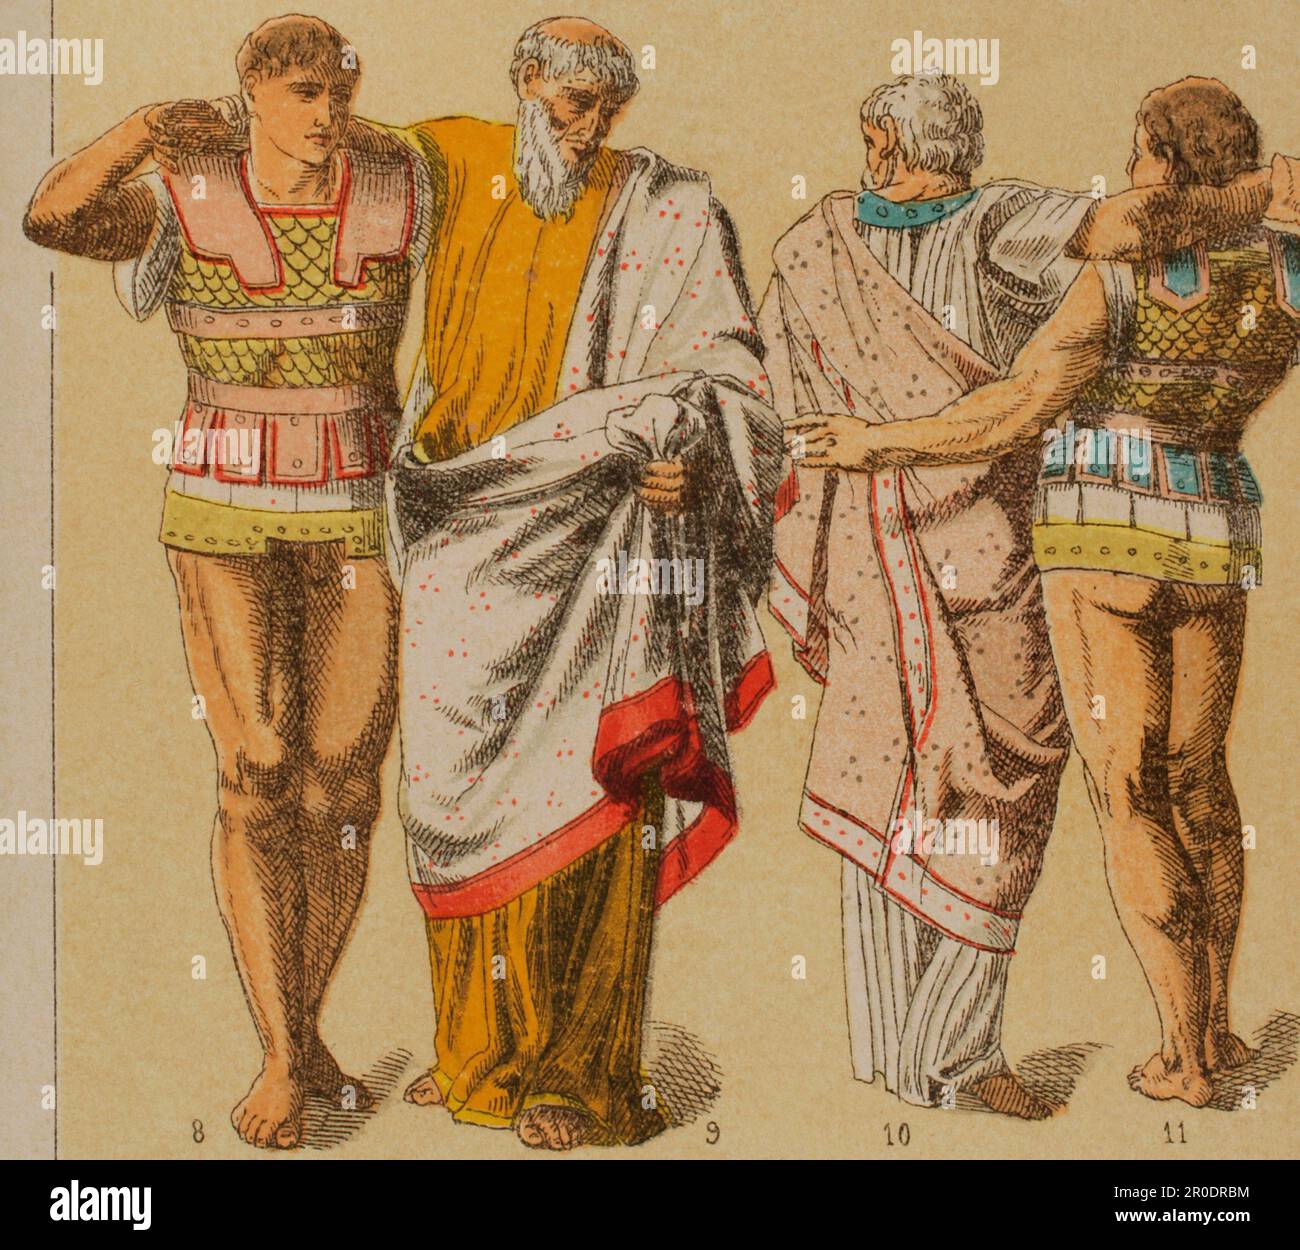 Etruscans. From left to right: 8- Etruscan armour, 9 and 10: chiton, 11- Etruscan armour. Chromolithography. 'Historia Universal' by César Cantú. Volume II, 1881. Stock Photo